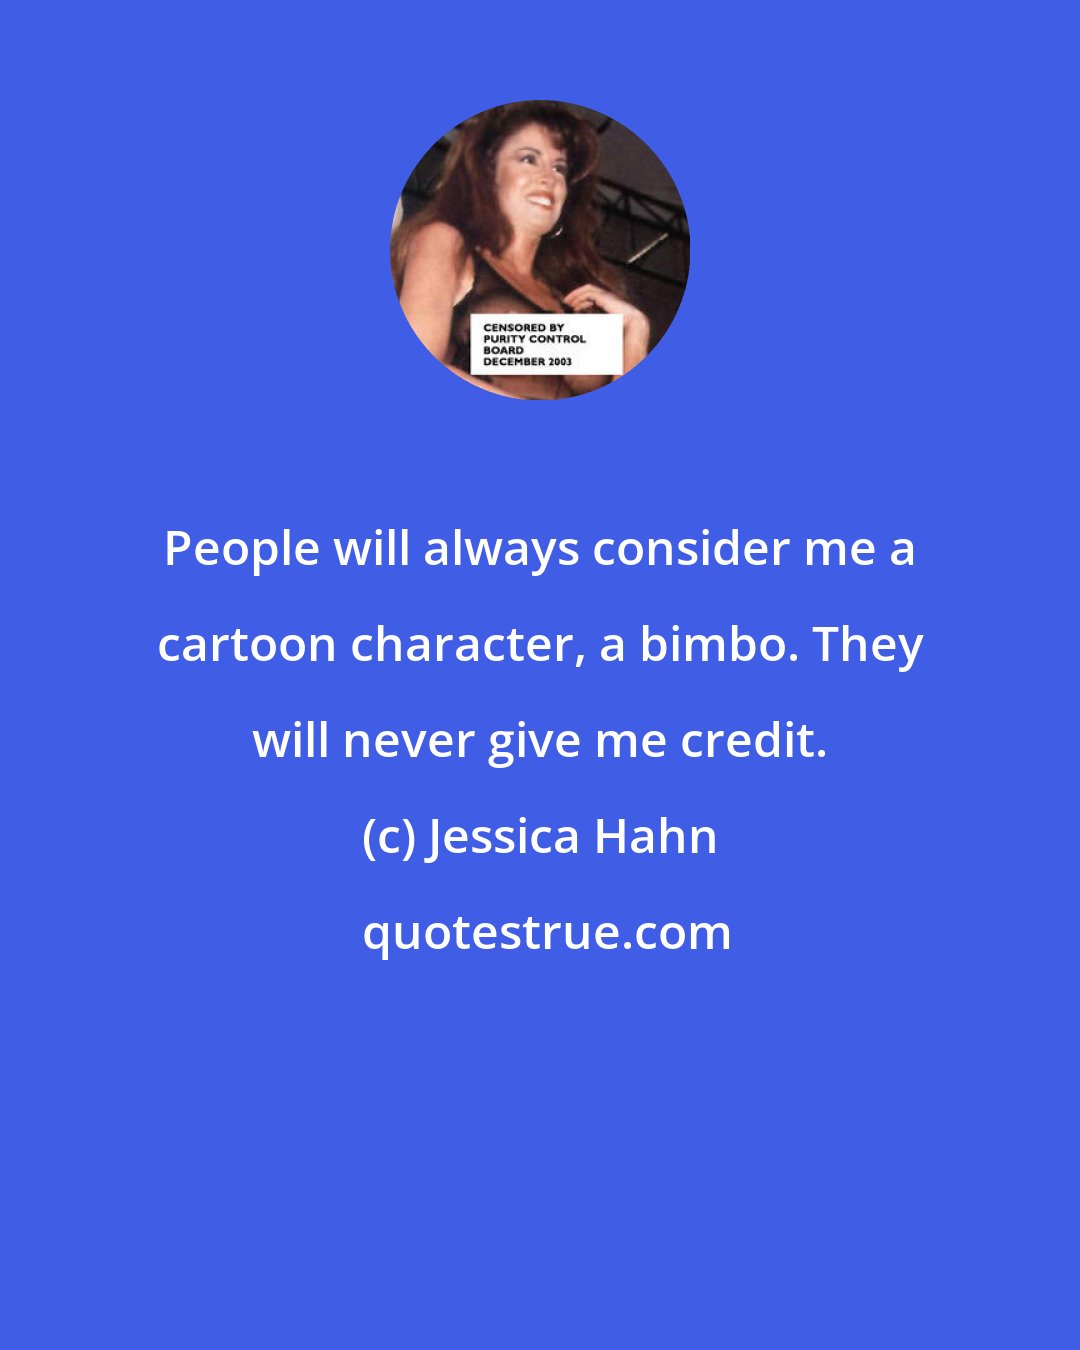 Jessica Hahn: People will always consider me a cartoon character, a bimbo. They will never give me credit.